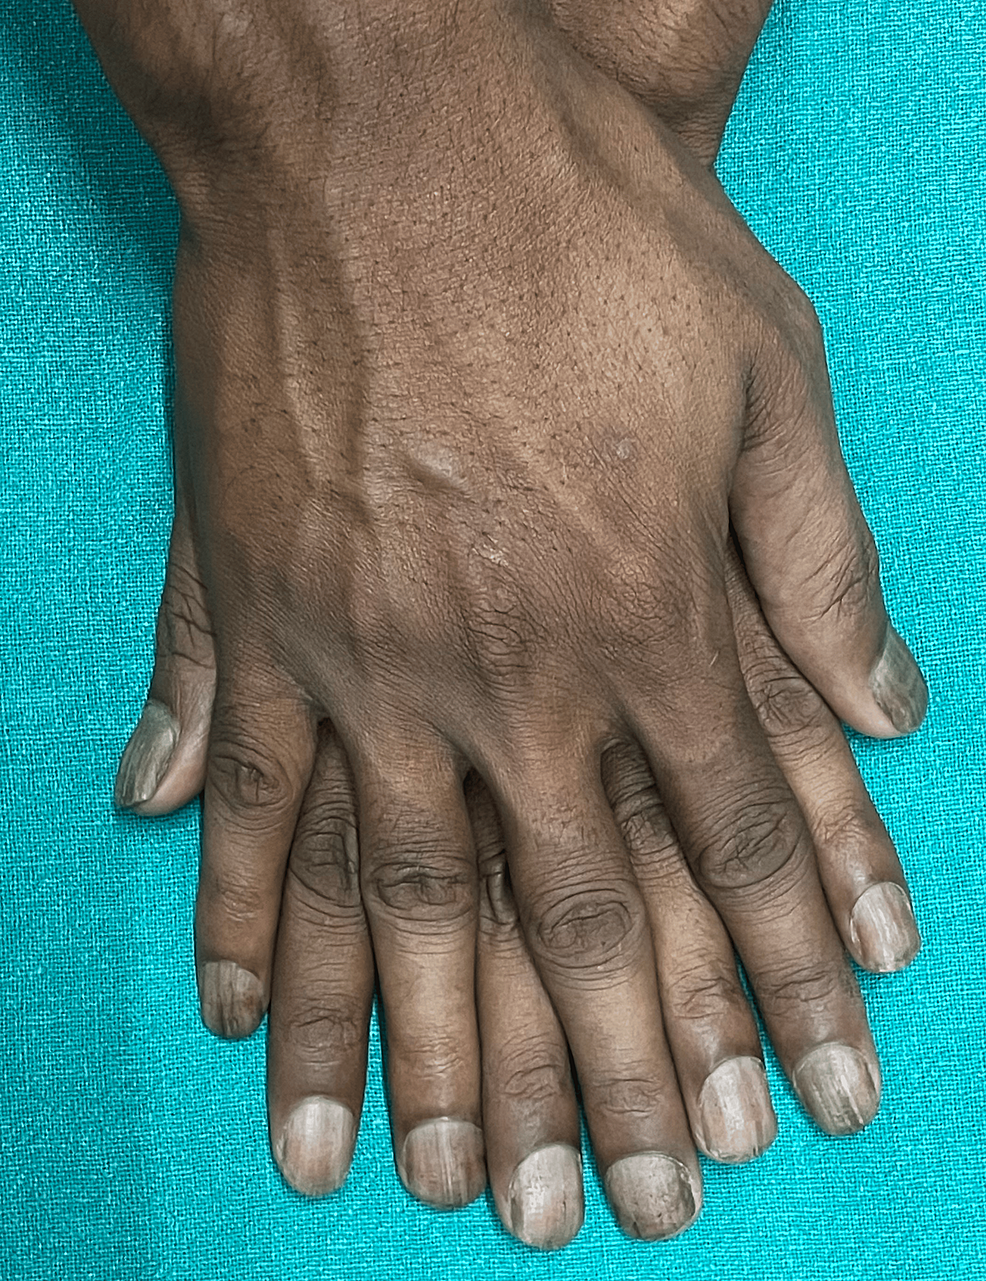 6 Things Your Fingernails Can Tell You About Your Health